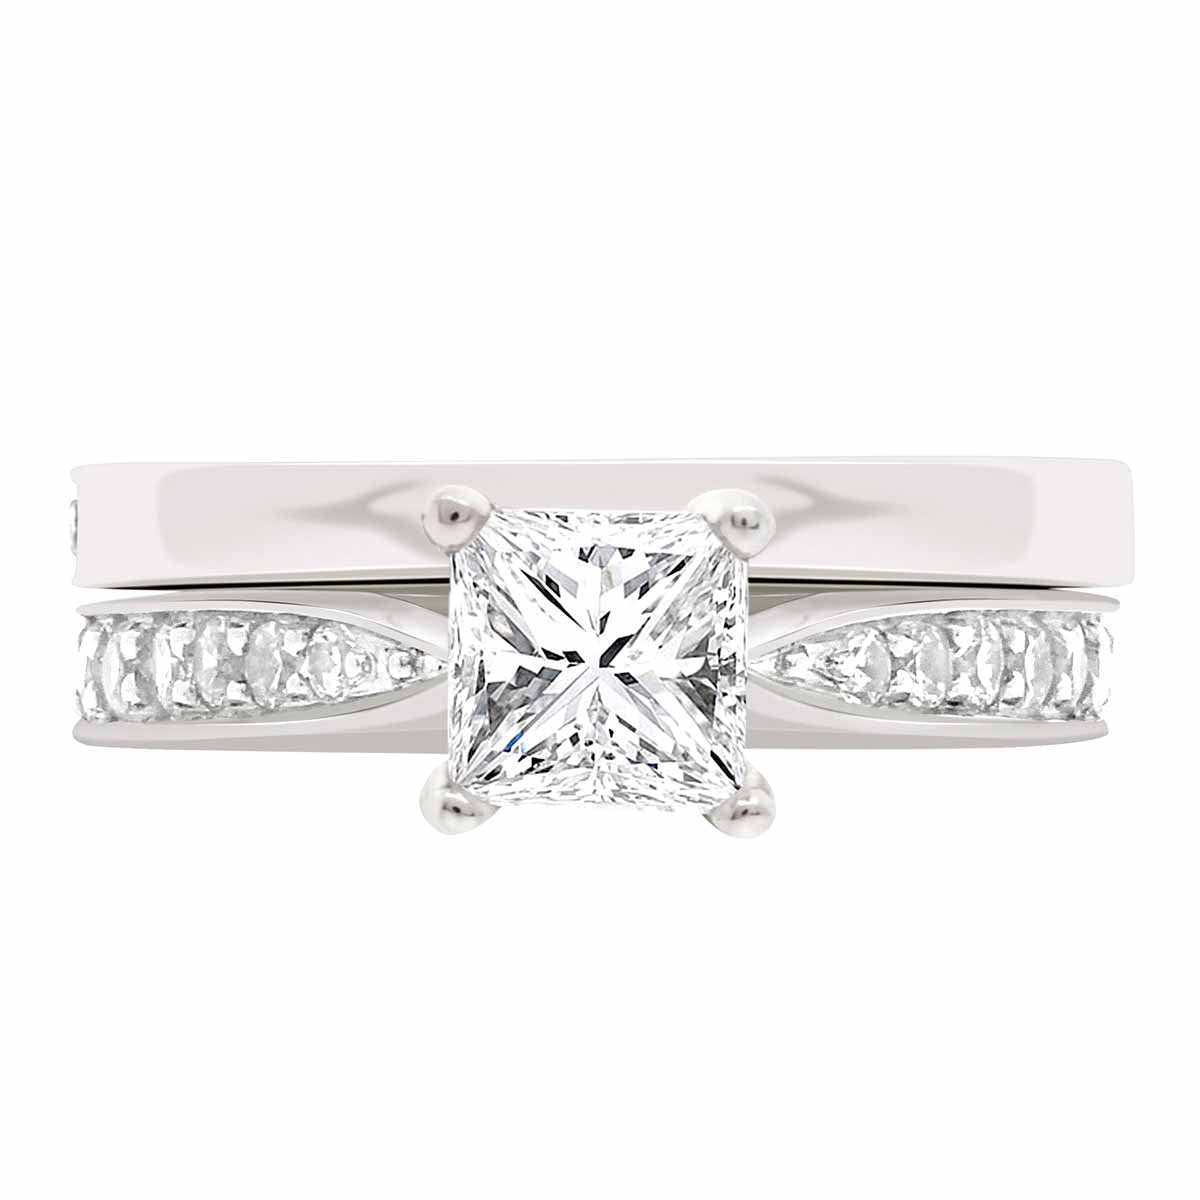 Princess Cut Diamond Solitaire ring with plain wedding band